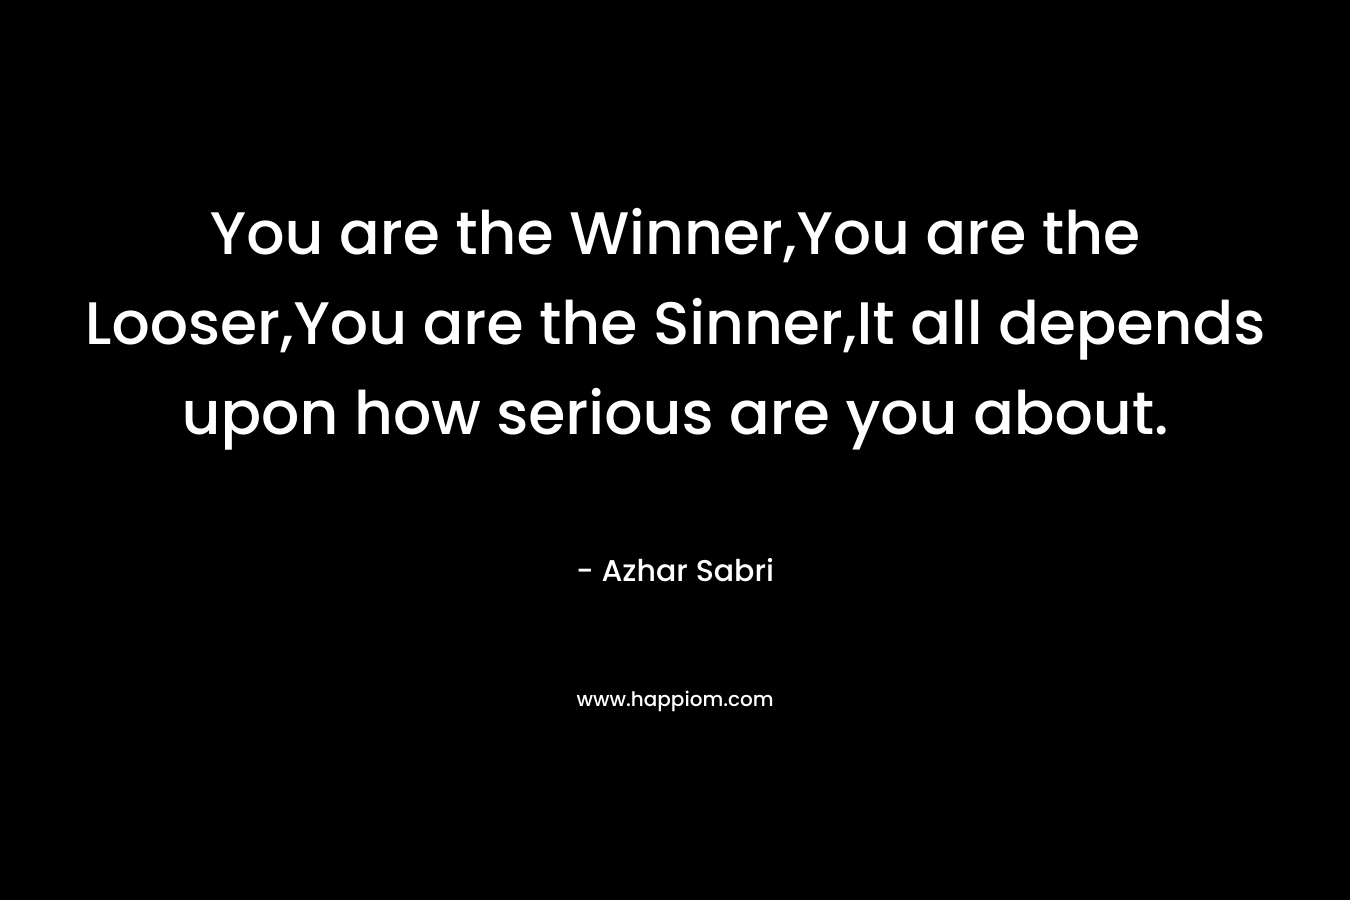 You are the Winner,You are the Looser,You are the Sinner,It all depends upon how serious are you about. – Azhar Sabri